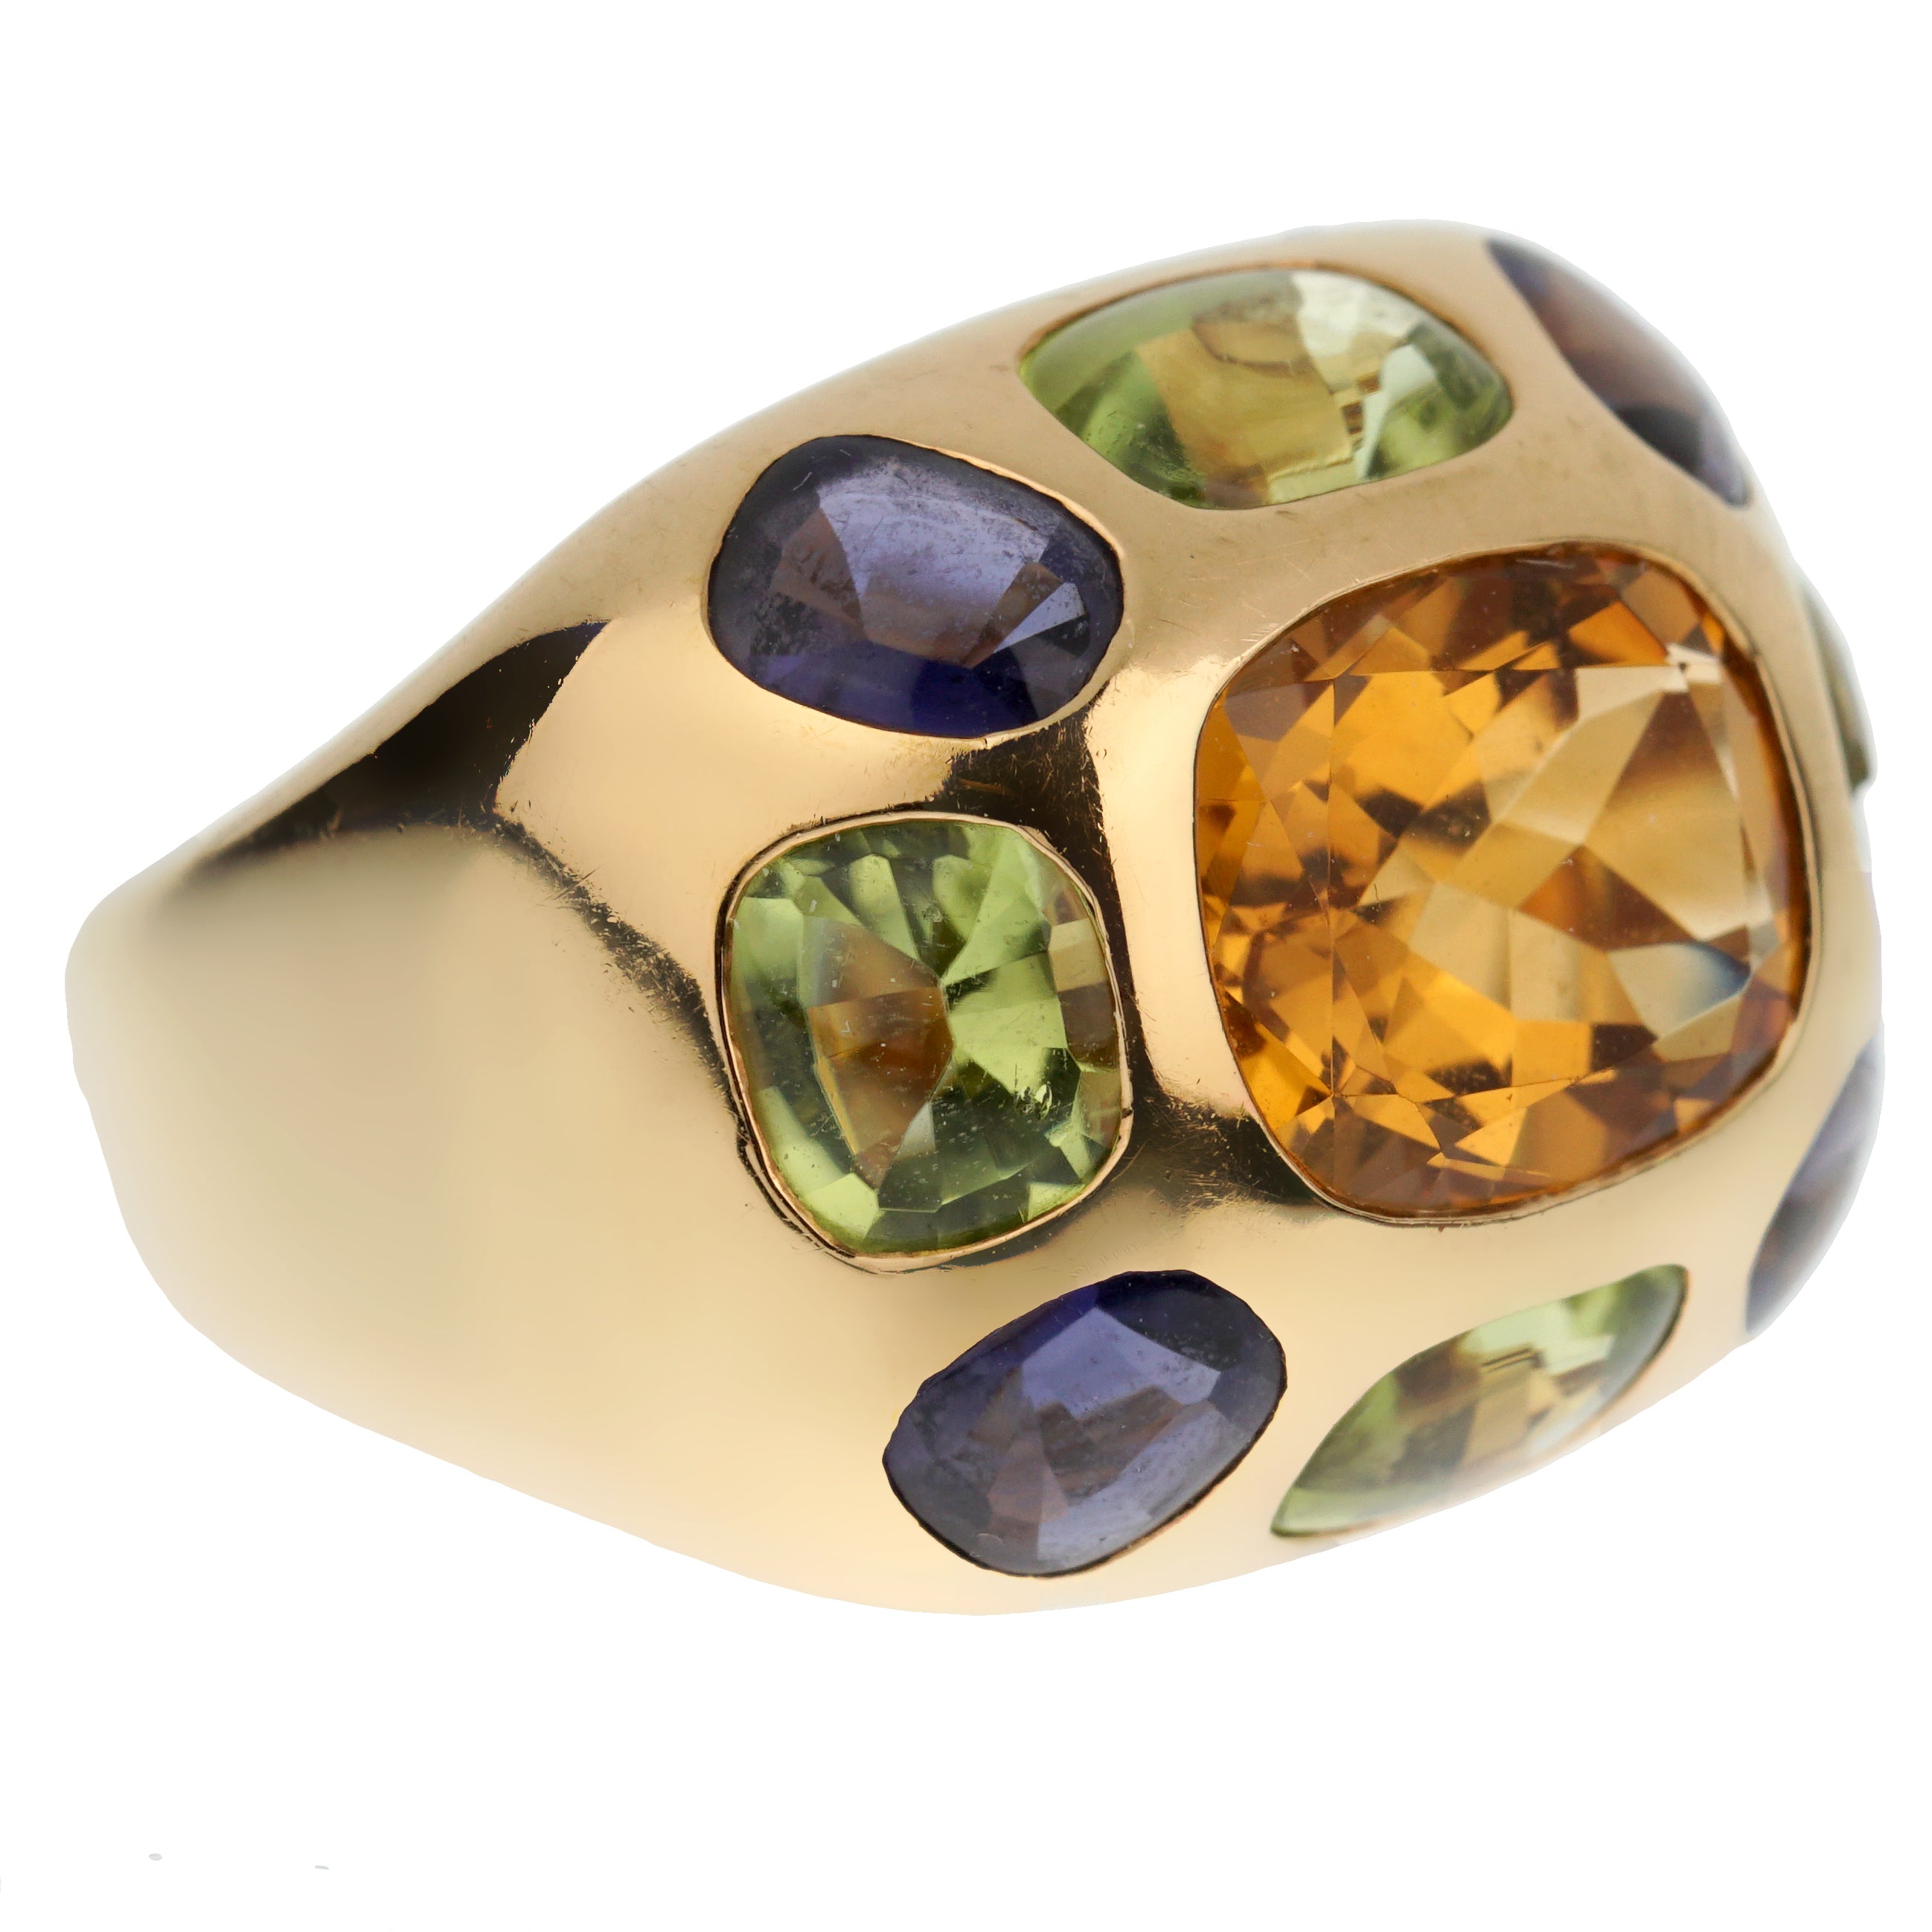 Chanel Mademoiselle citrine, amethyst, cultured pearl, colored sapphirs and gold  ring